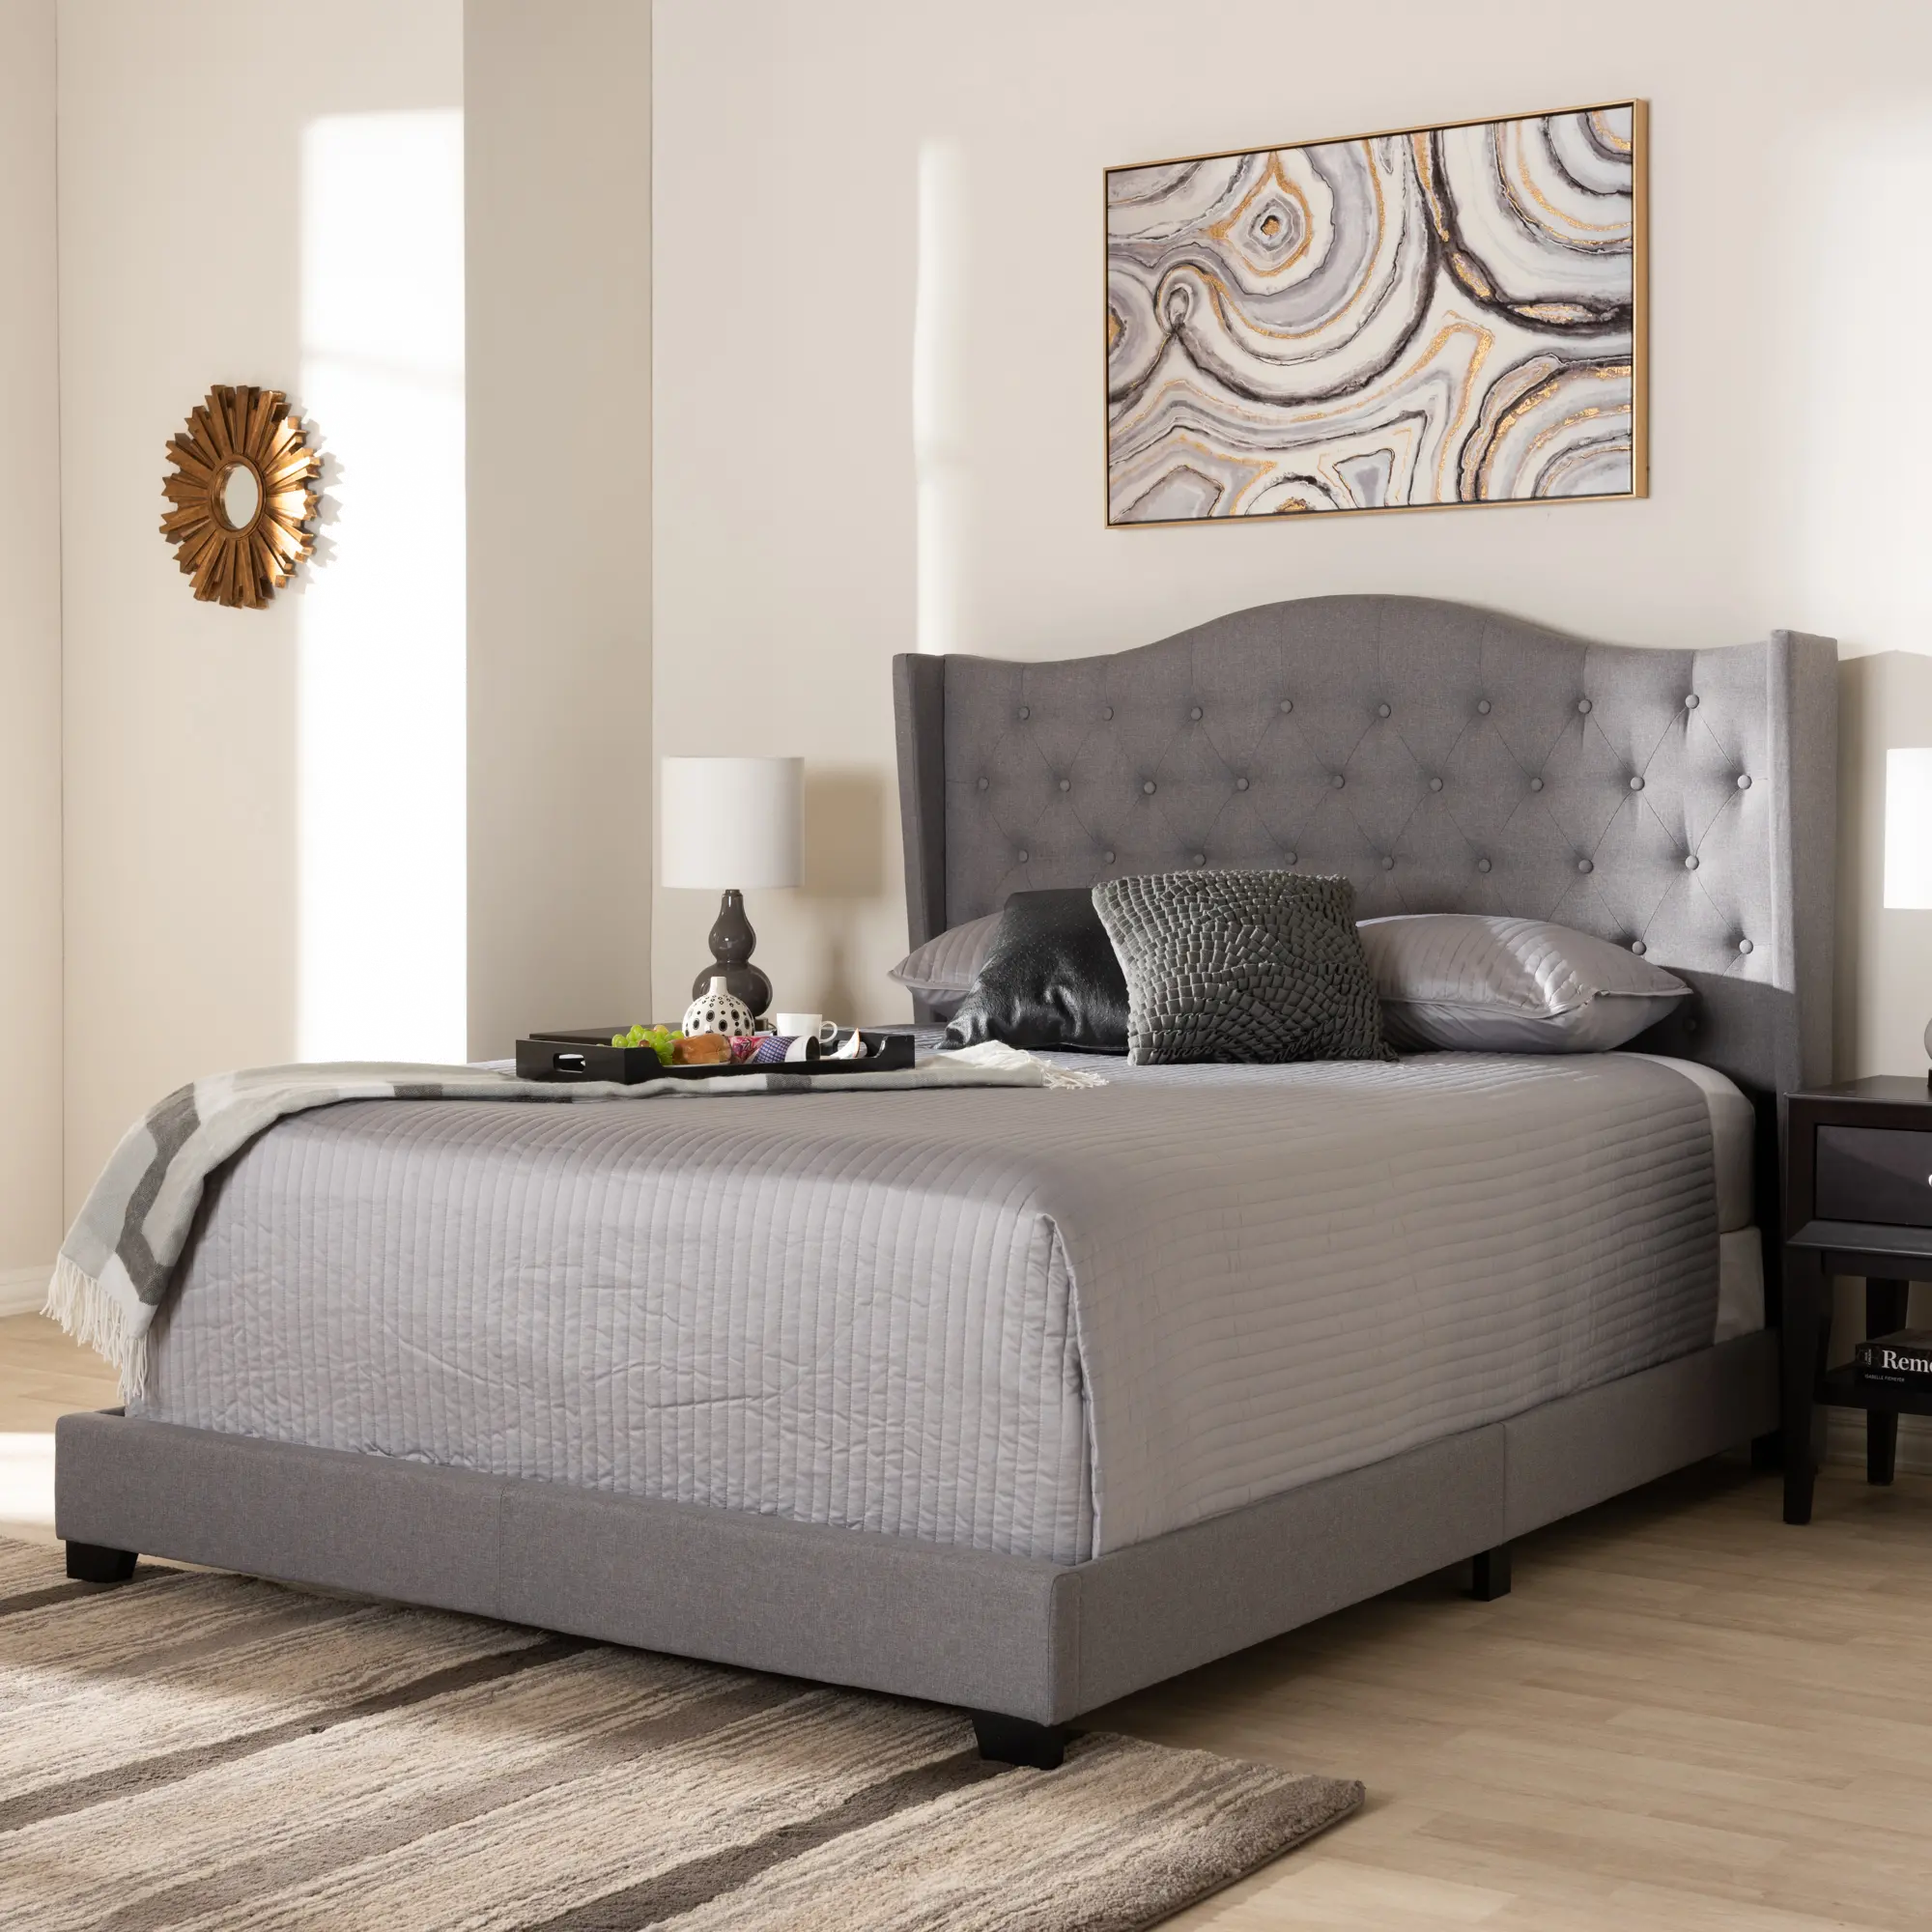 149-8929-RCW Contemporary Light Gray Upholstered Full Bed - Nat sku 149-8929-RCW